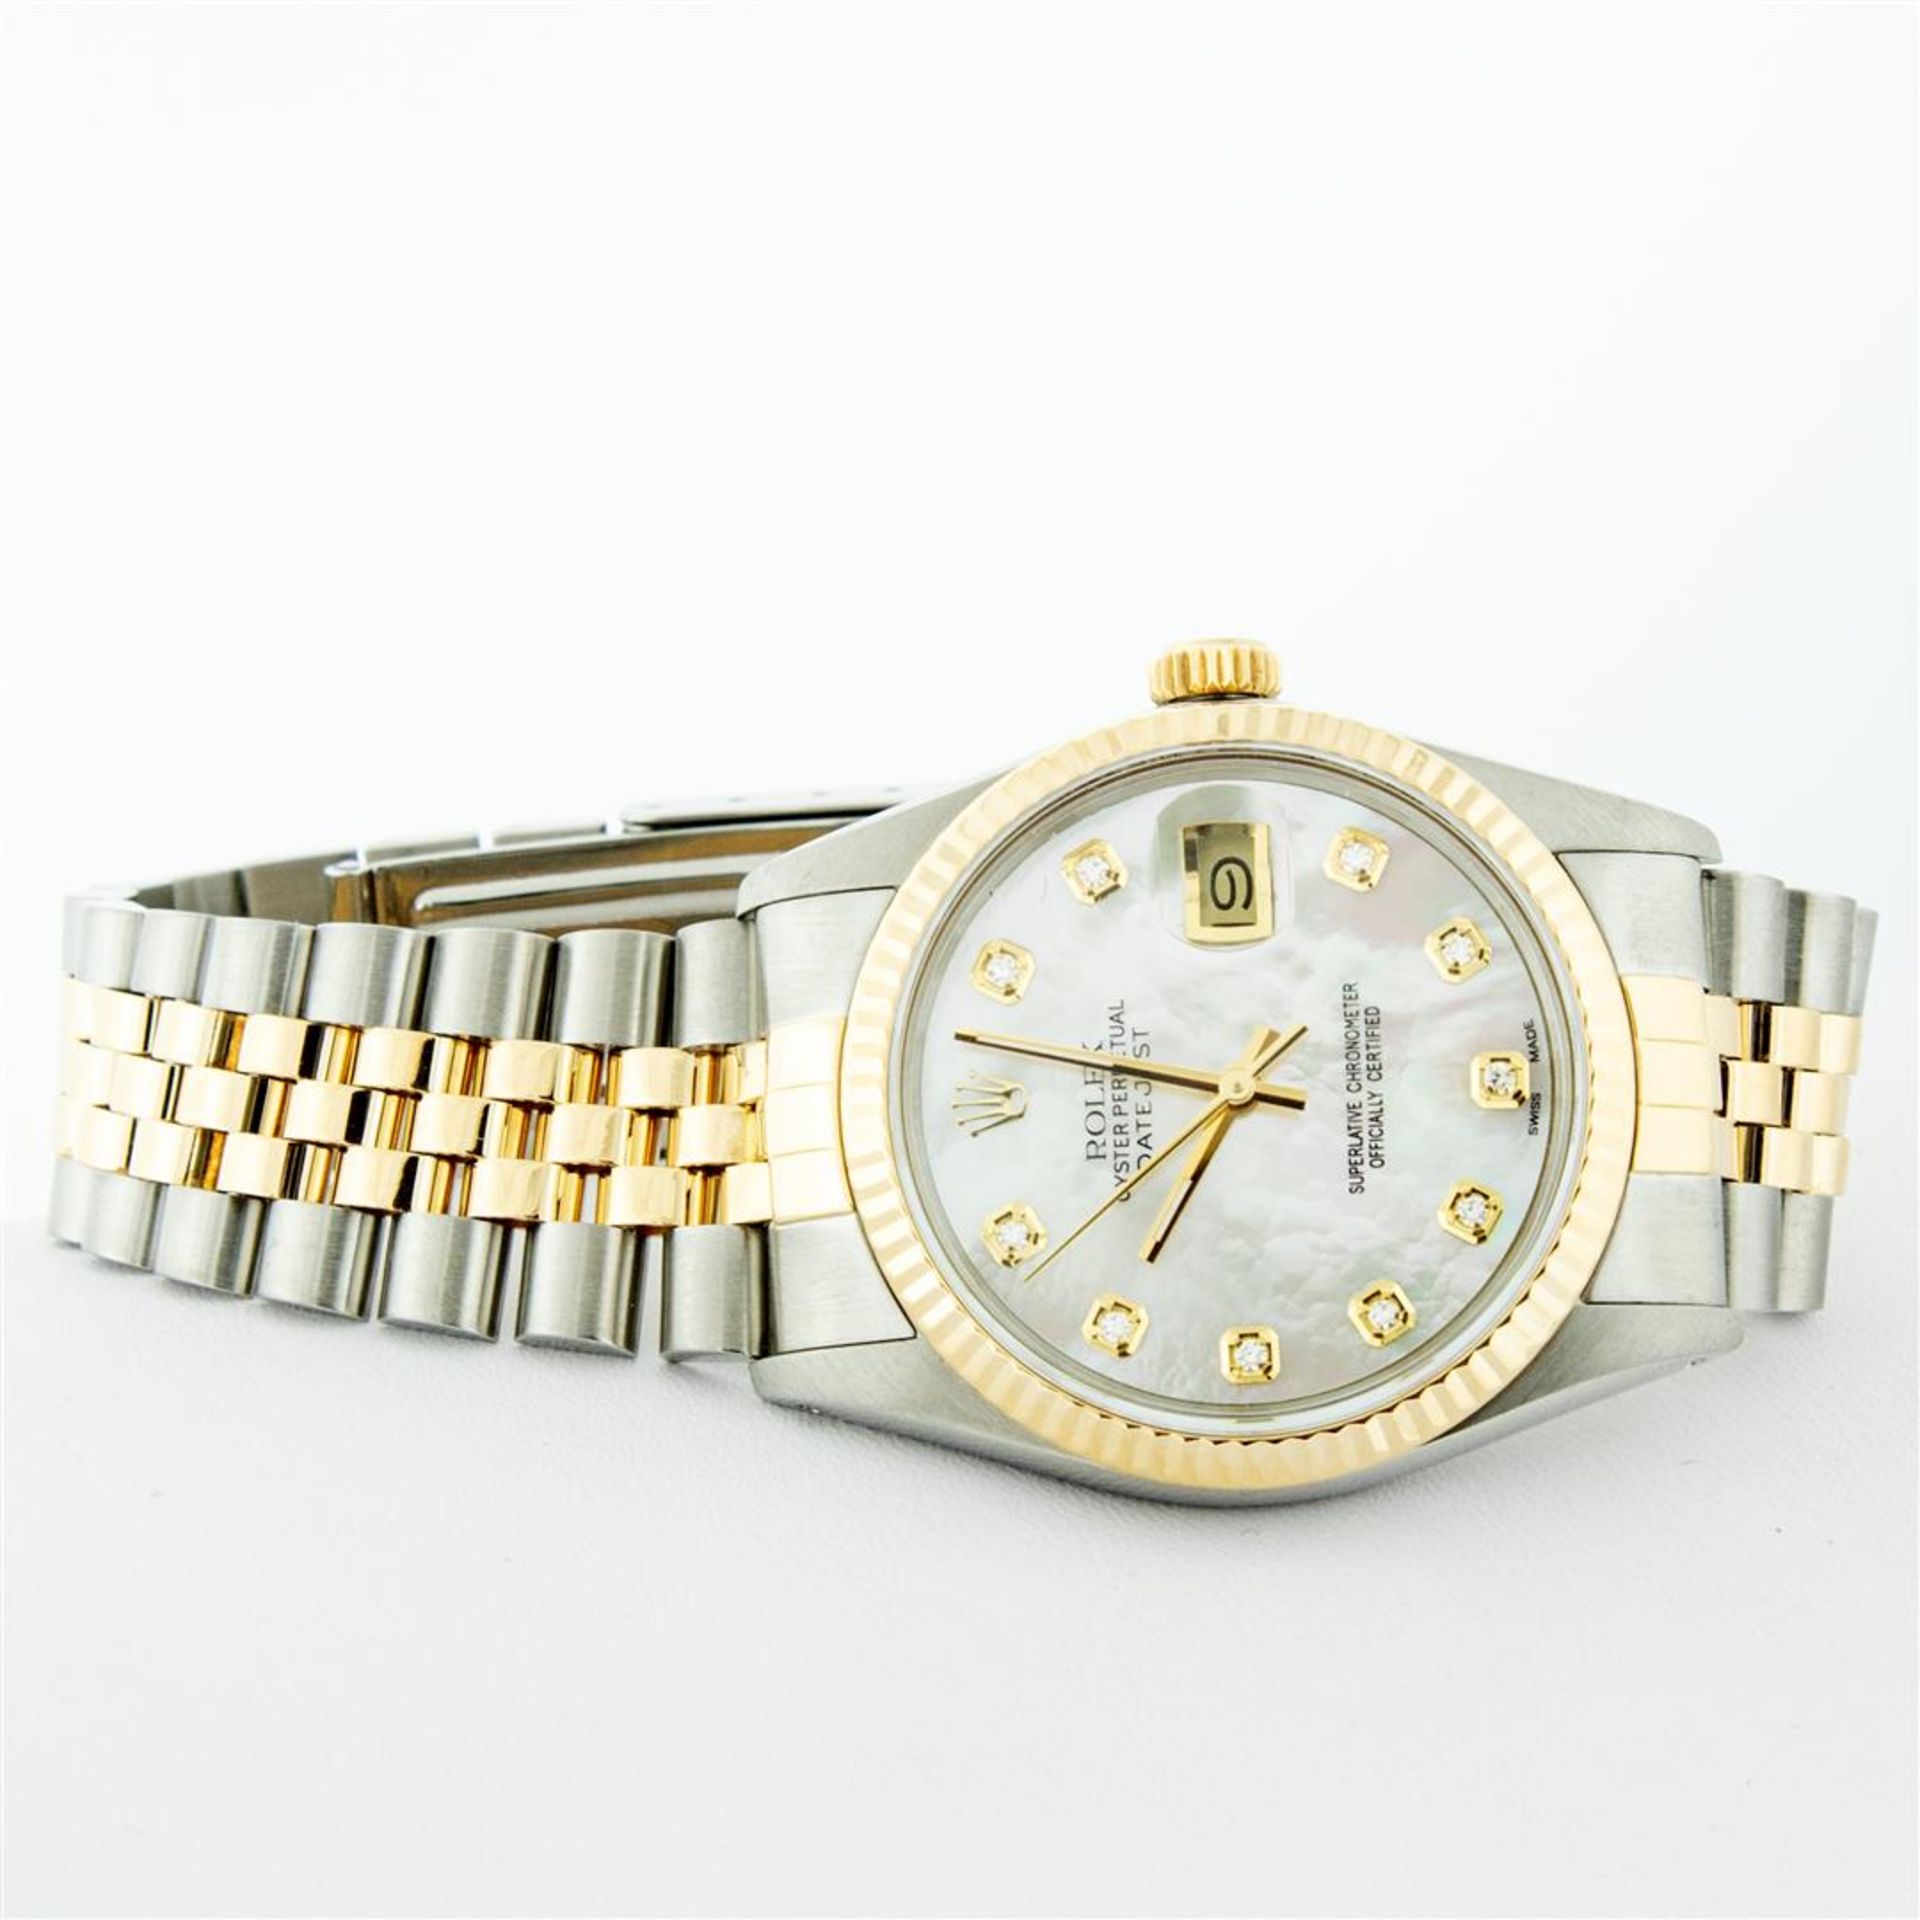 Rolex Mens 2 Tone Mother Of Pearl VS Diamond 36MM Datejust Wristwatch - Image 4 of 9